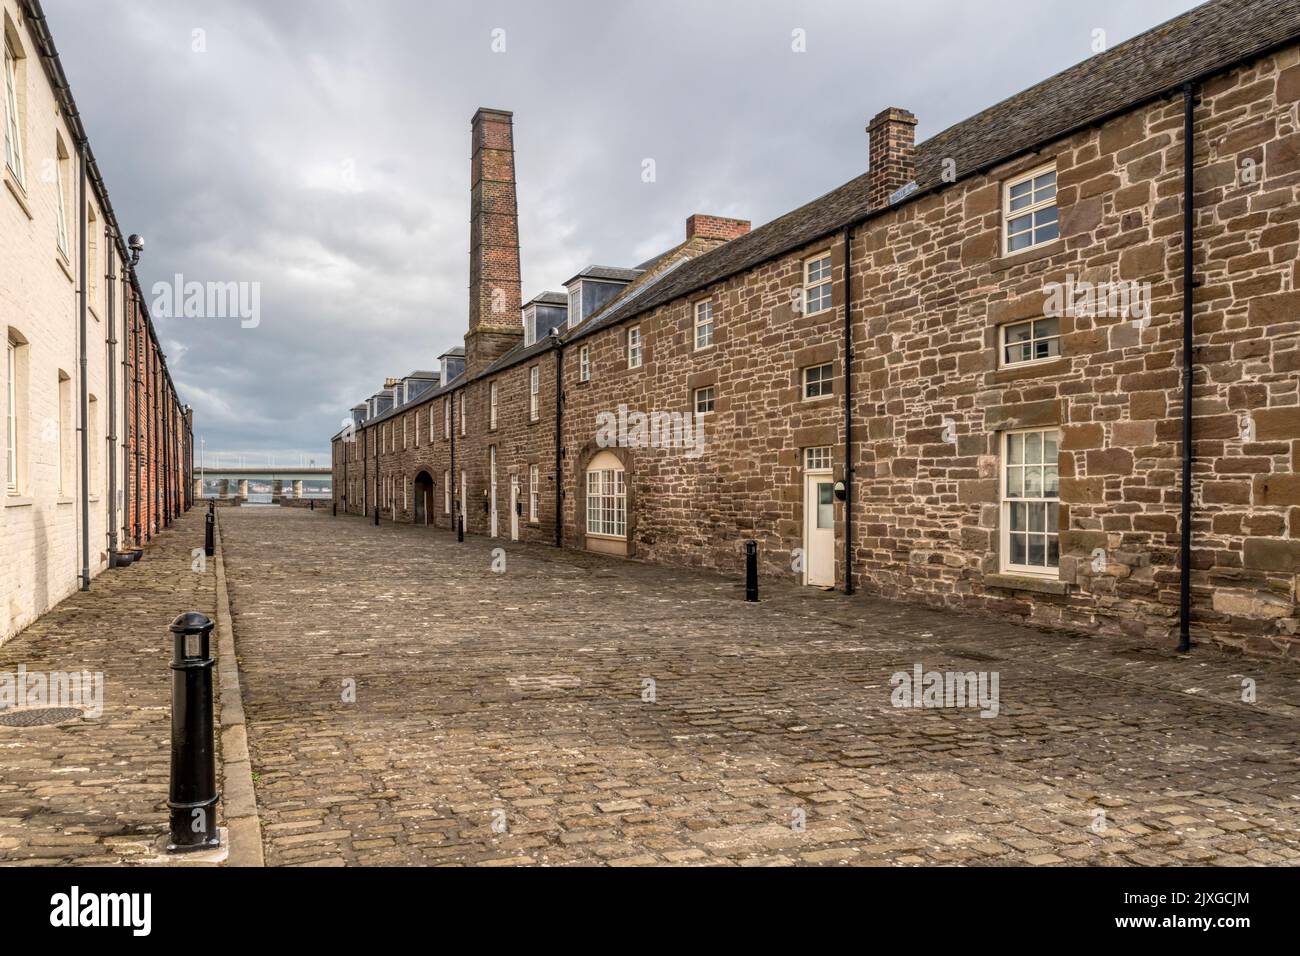 Chandlers Lane, Dundee contains homes converted from the former harbour workshops dating back to 1837. The chimney marks the original blacksmiths. Stock Photo